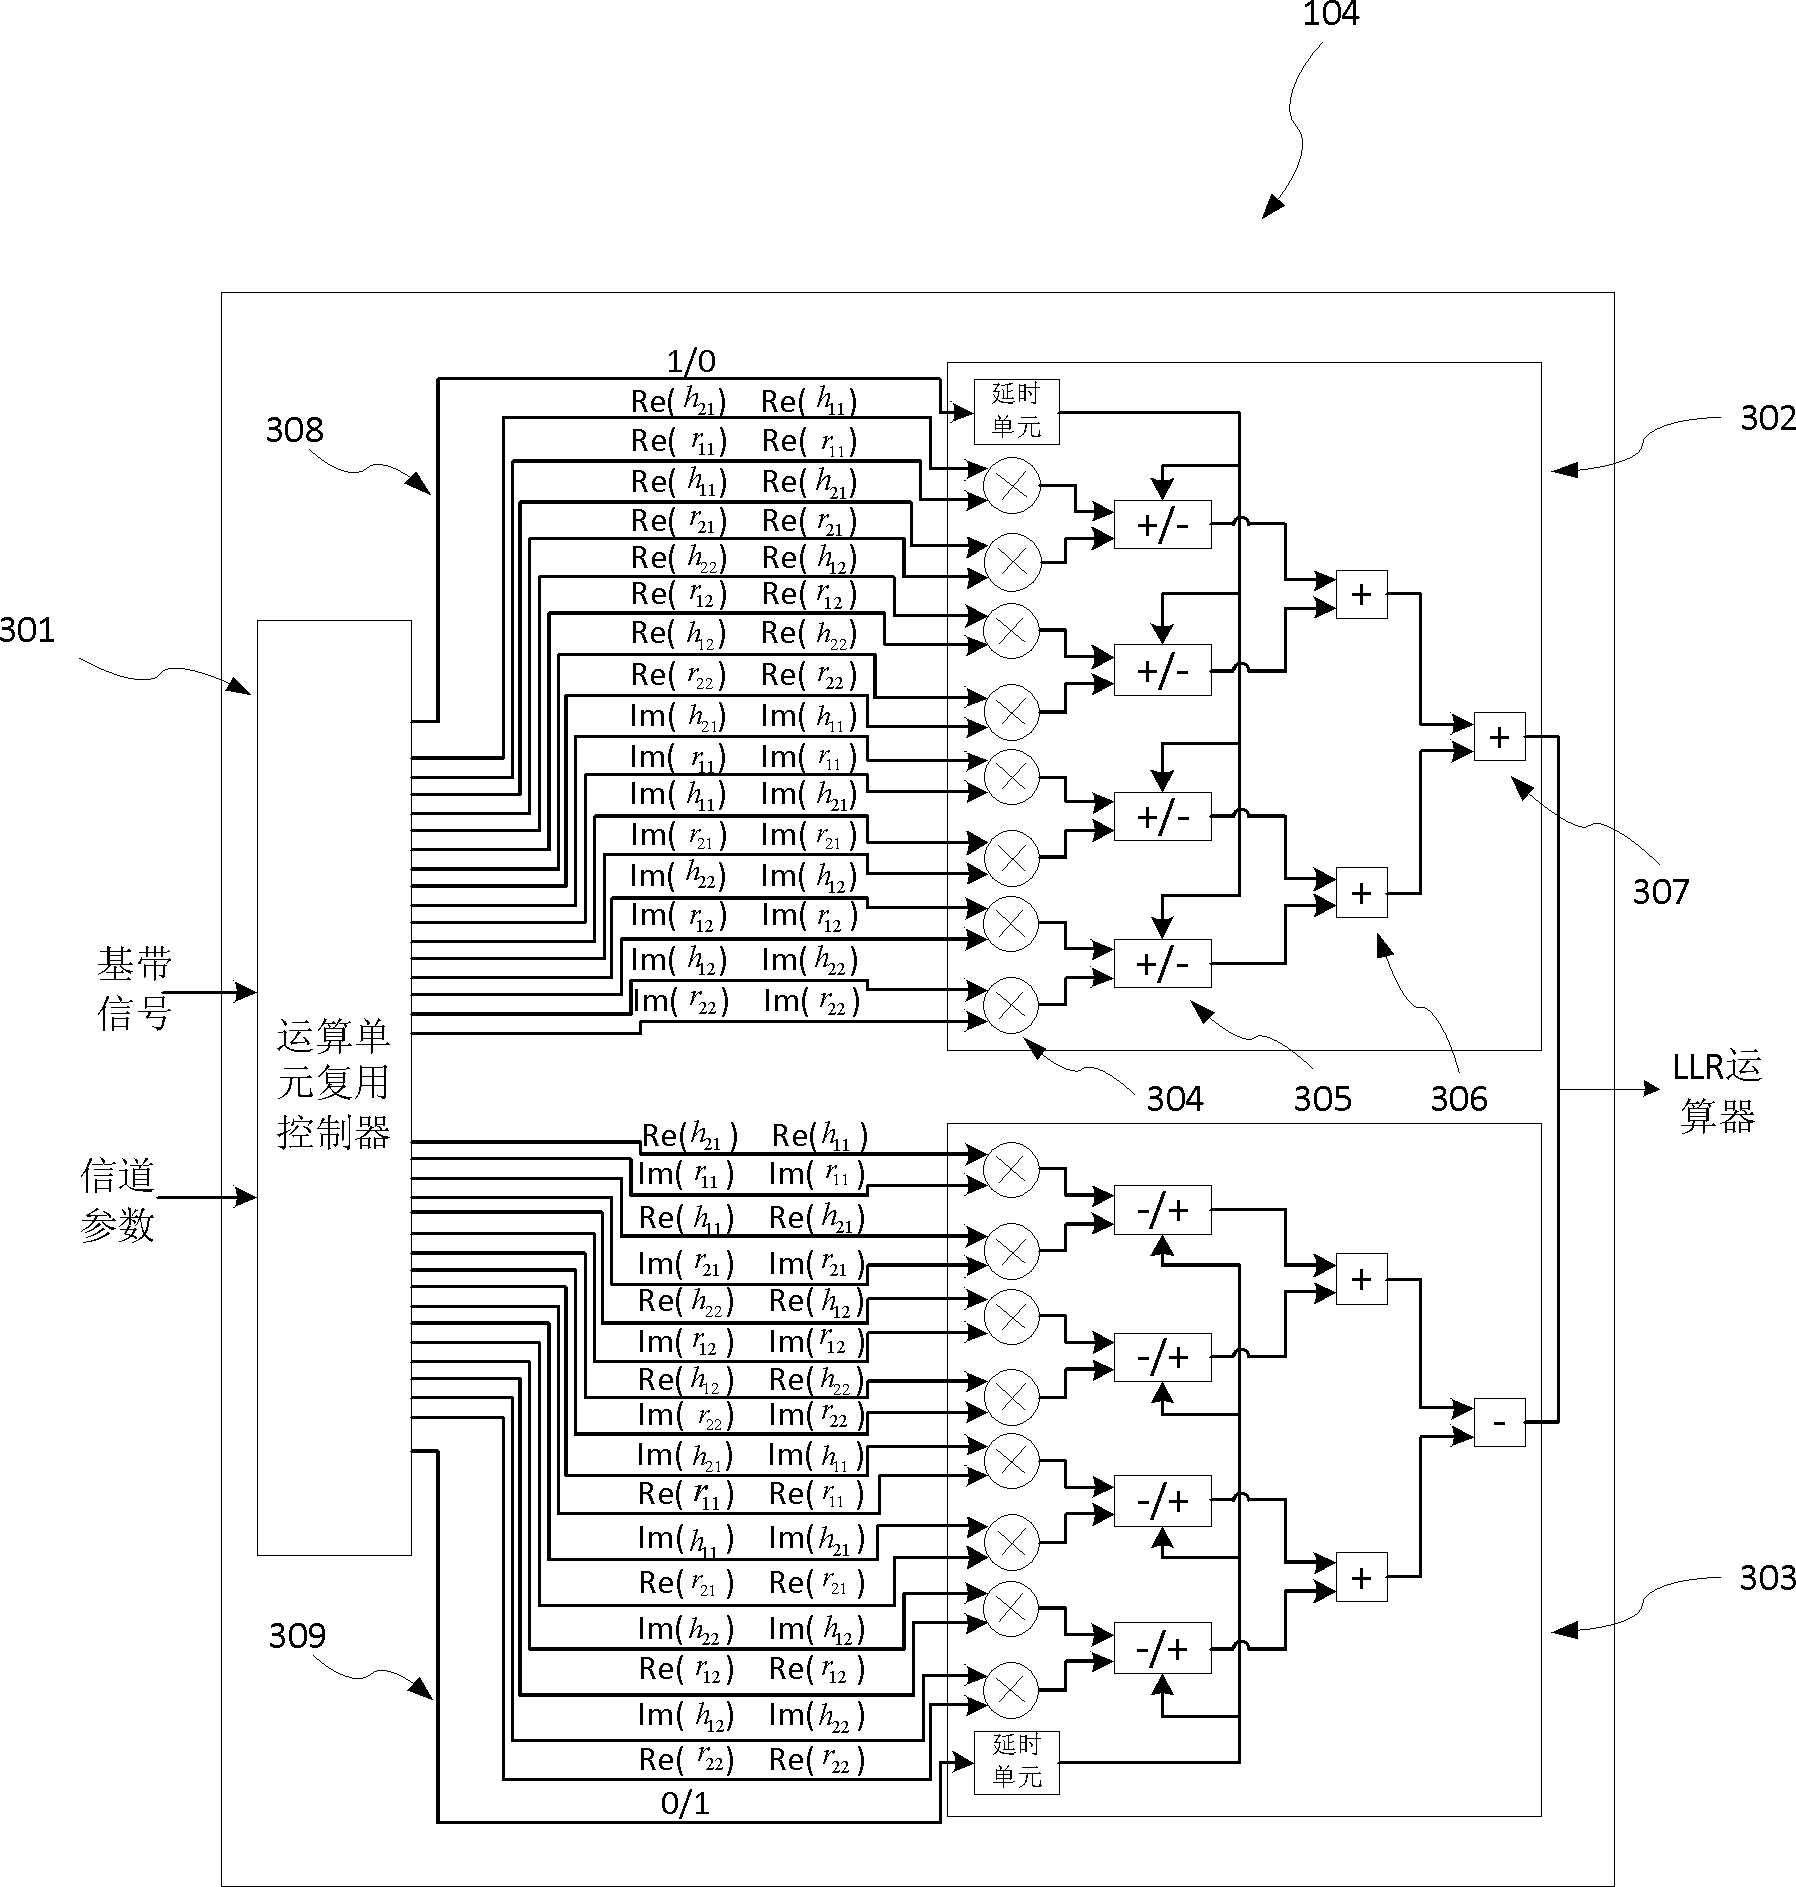 Method for generating soft decision measurement in Turbo-STBC system